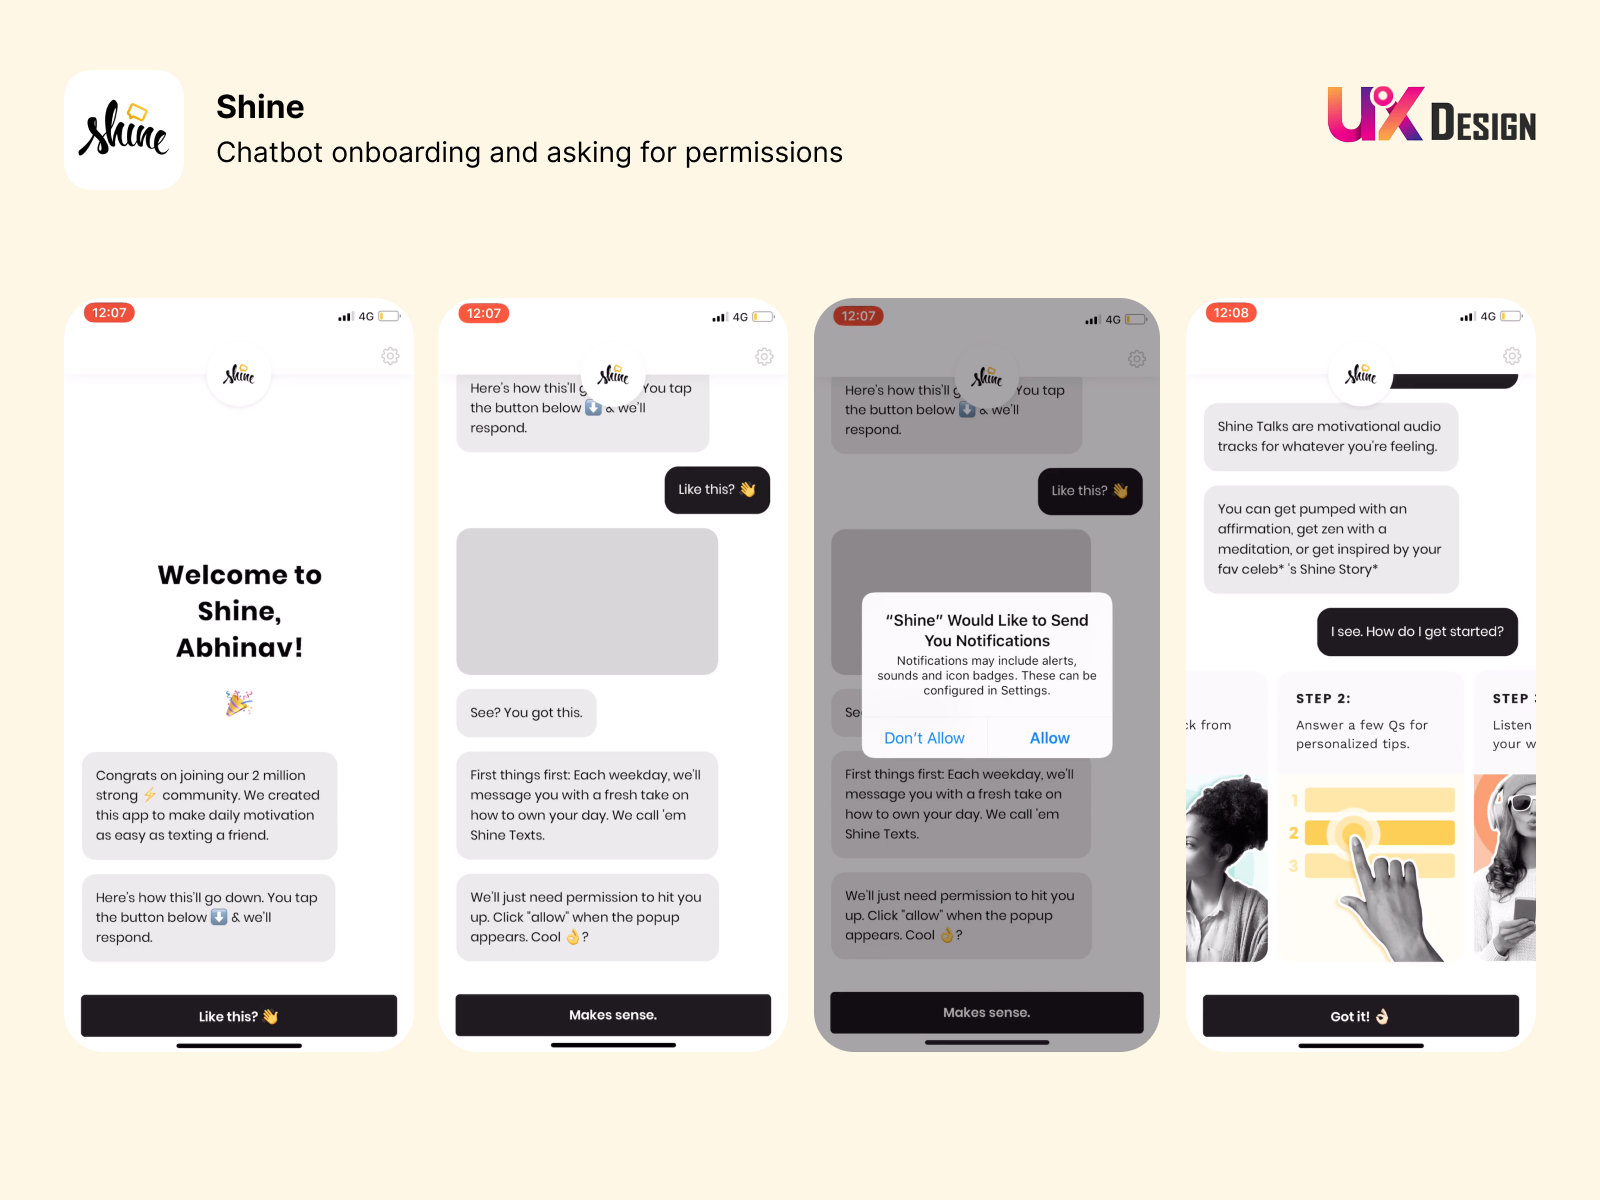 Chat bot onboarding and permissions